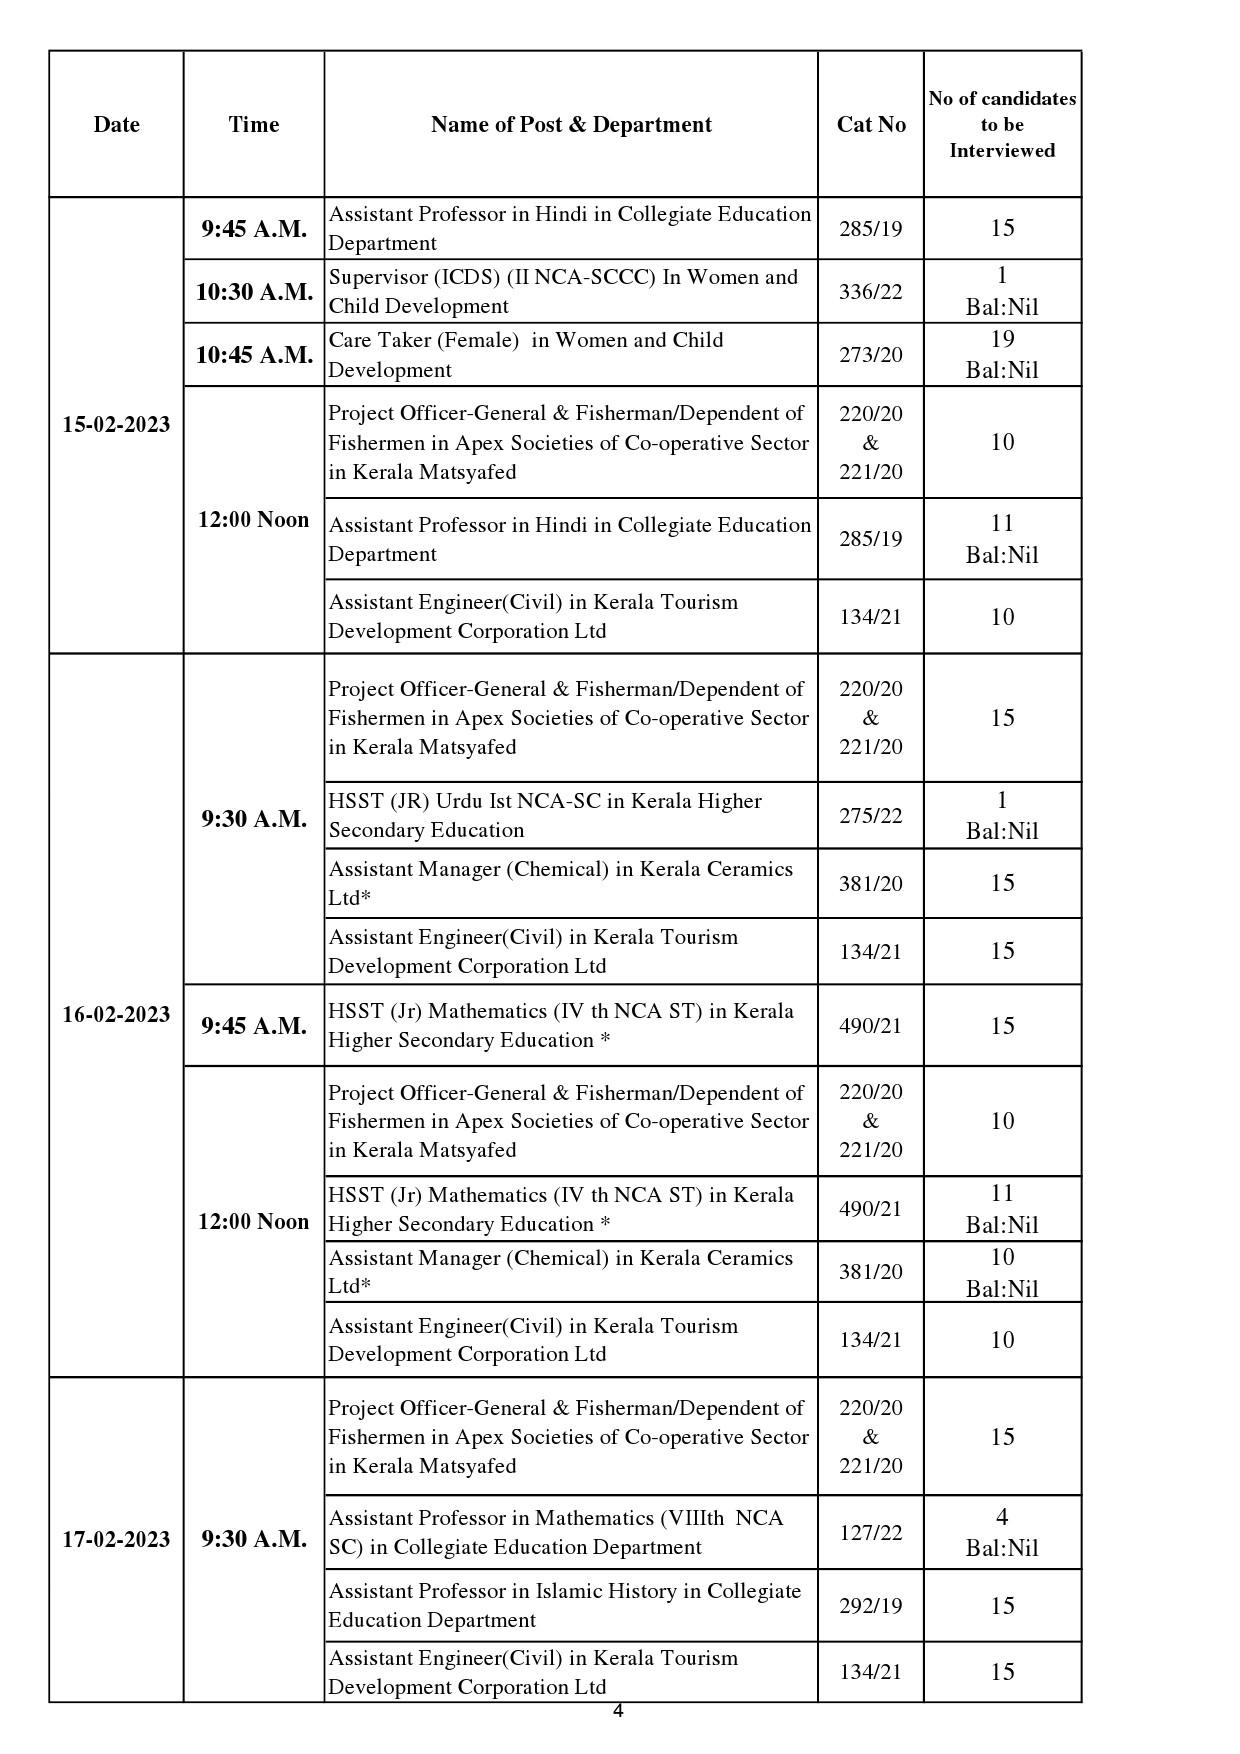 KPSC Interview Programme For The Month Of February 2023 - Notification Image 4